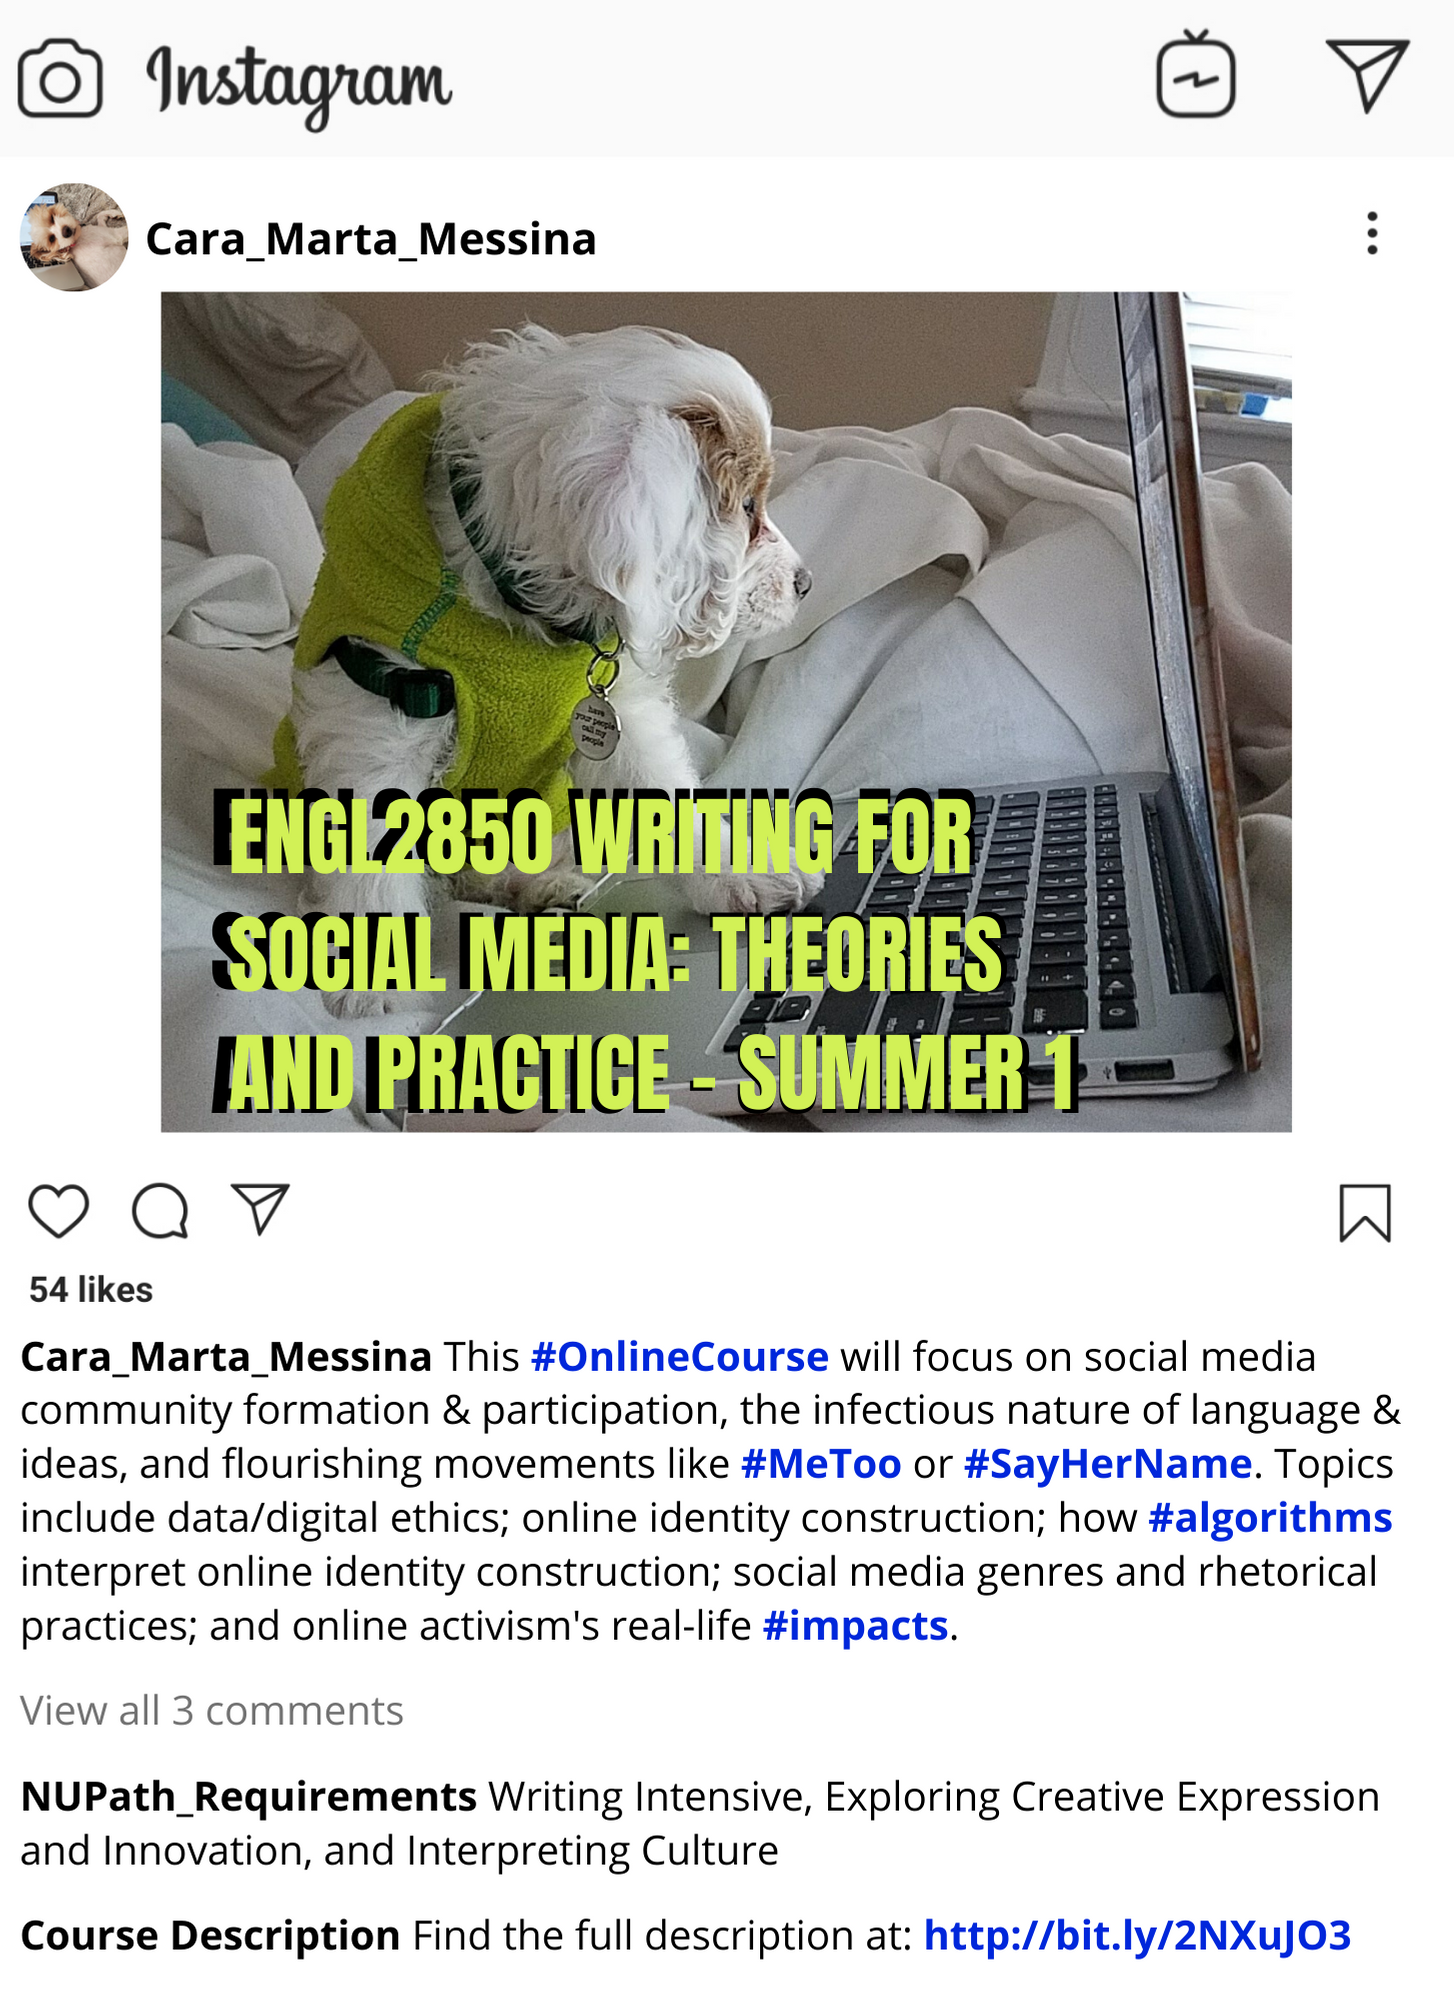 This image is a course poster for Writing for Social Media, which looks like an instagram post. The photo is of Cara's dog, Efi, placing a paw on the computer. The description taks about the main themes of the course, including ethics around big data/algorithms, online community, identity formation, and activism.